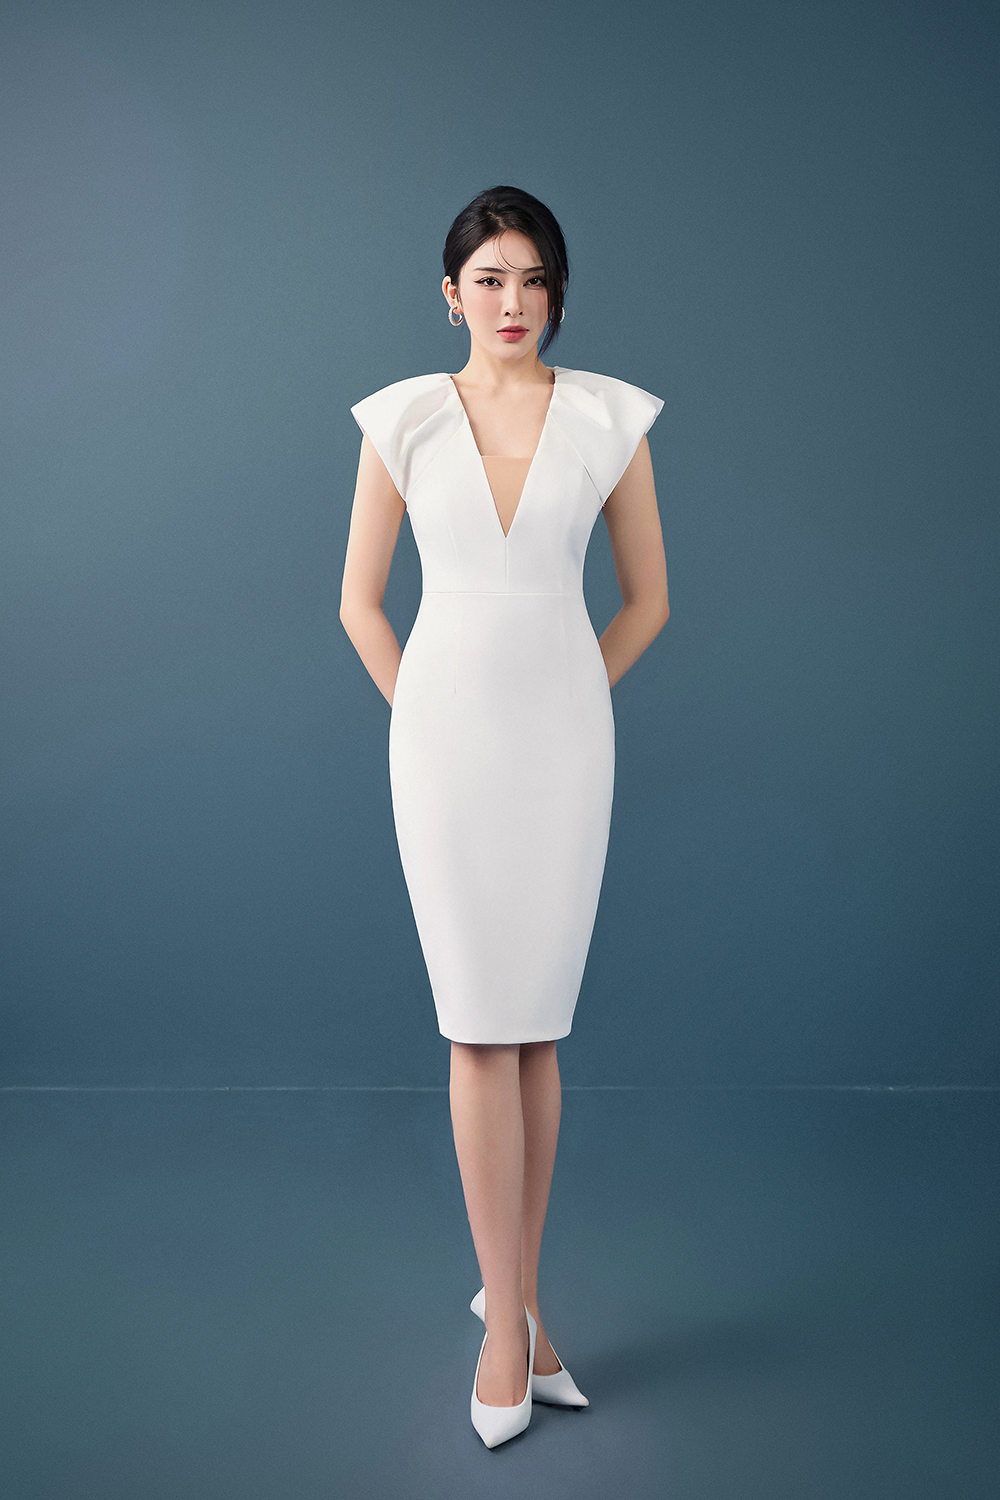 https://d12hzjwrv4lm49.cloudfront.net/sites/files/chello/images/products/202305/jae_ruched_shoulder_v-neck_pencil_dress_in_iconic_white_2.jpg